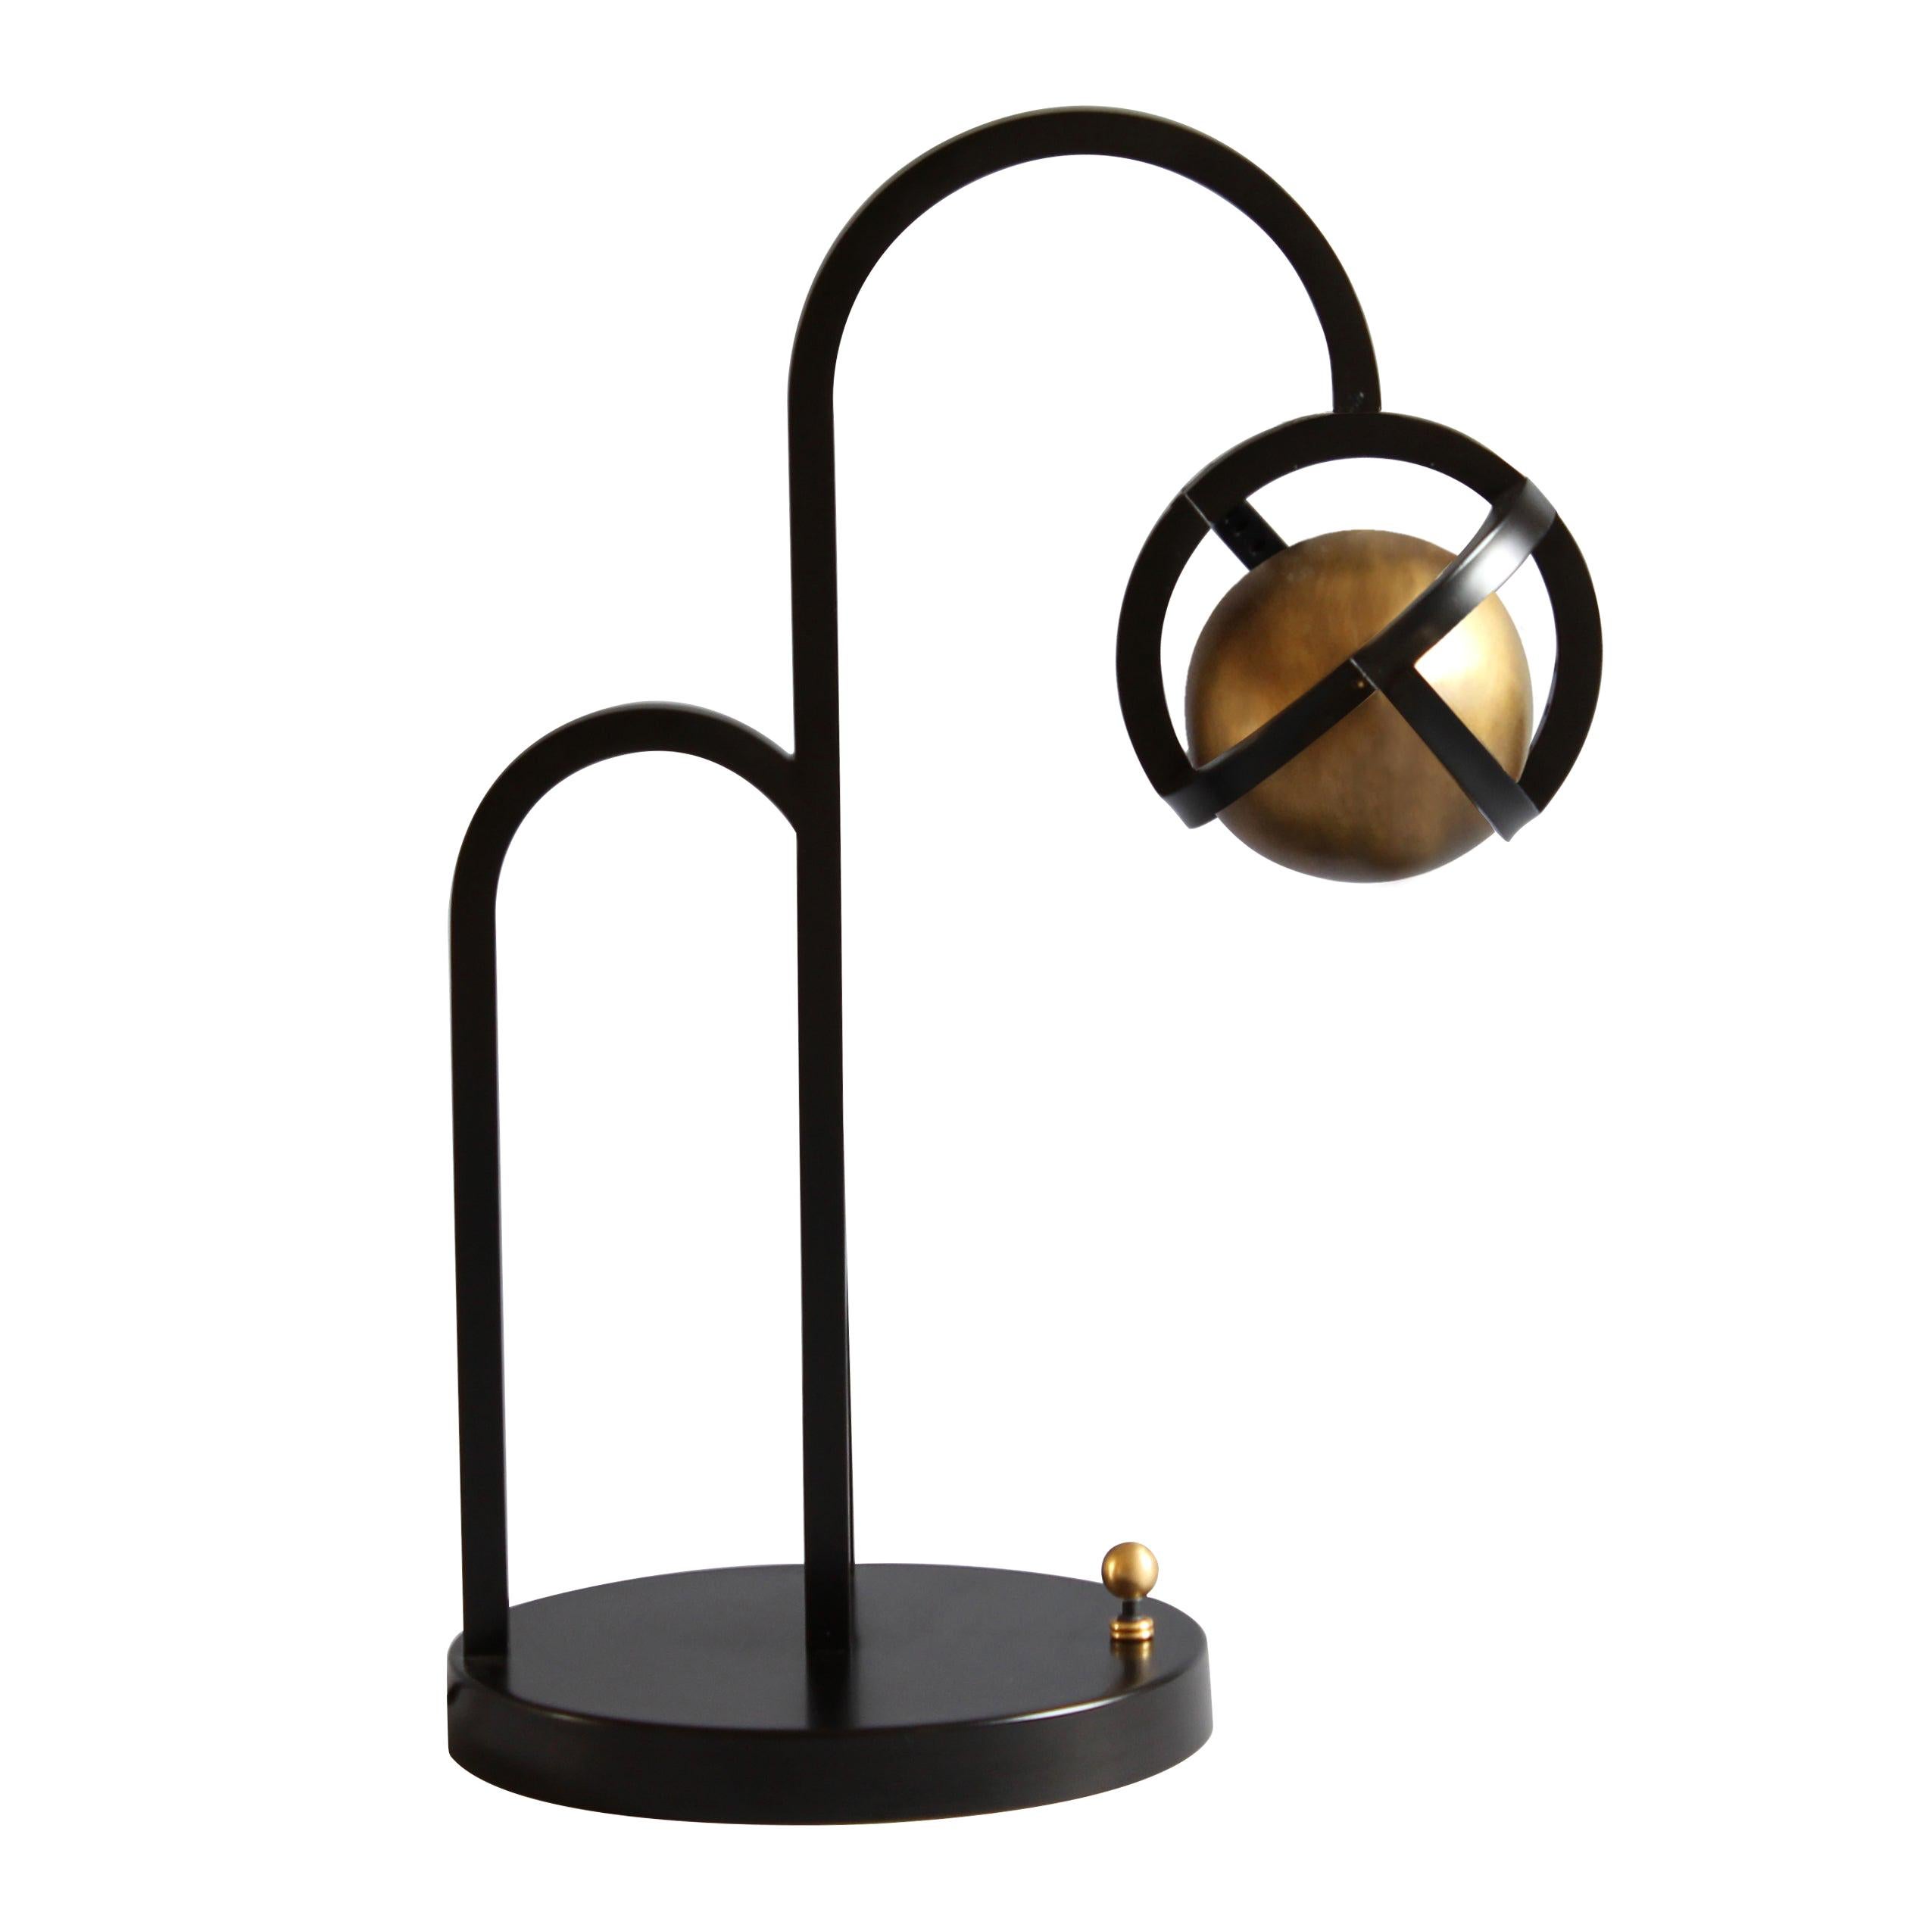 Planetaria Table Lamp, Black Frame and Brass Sphere by Lara Bohinc, In Stock